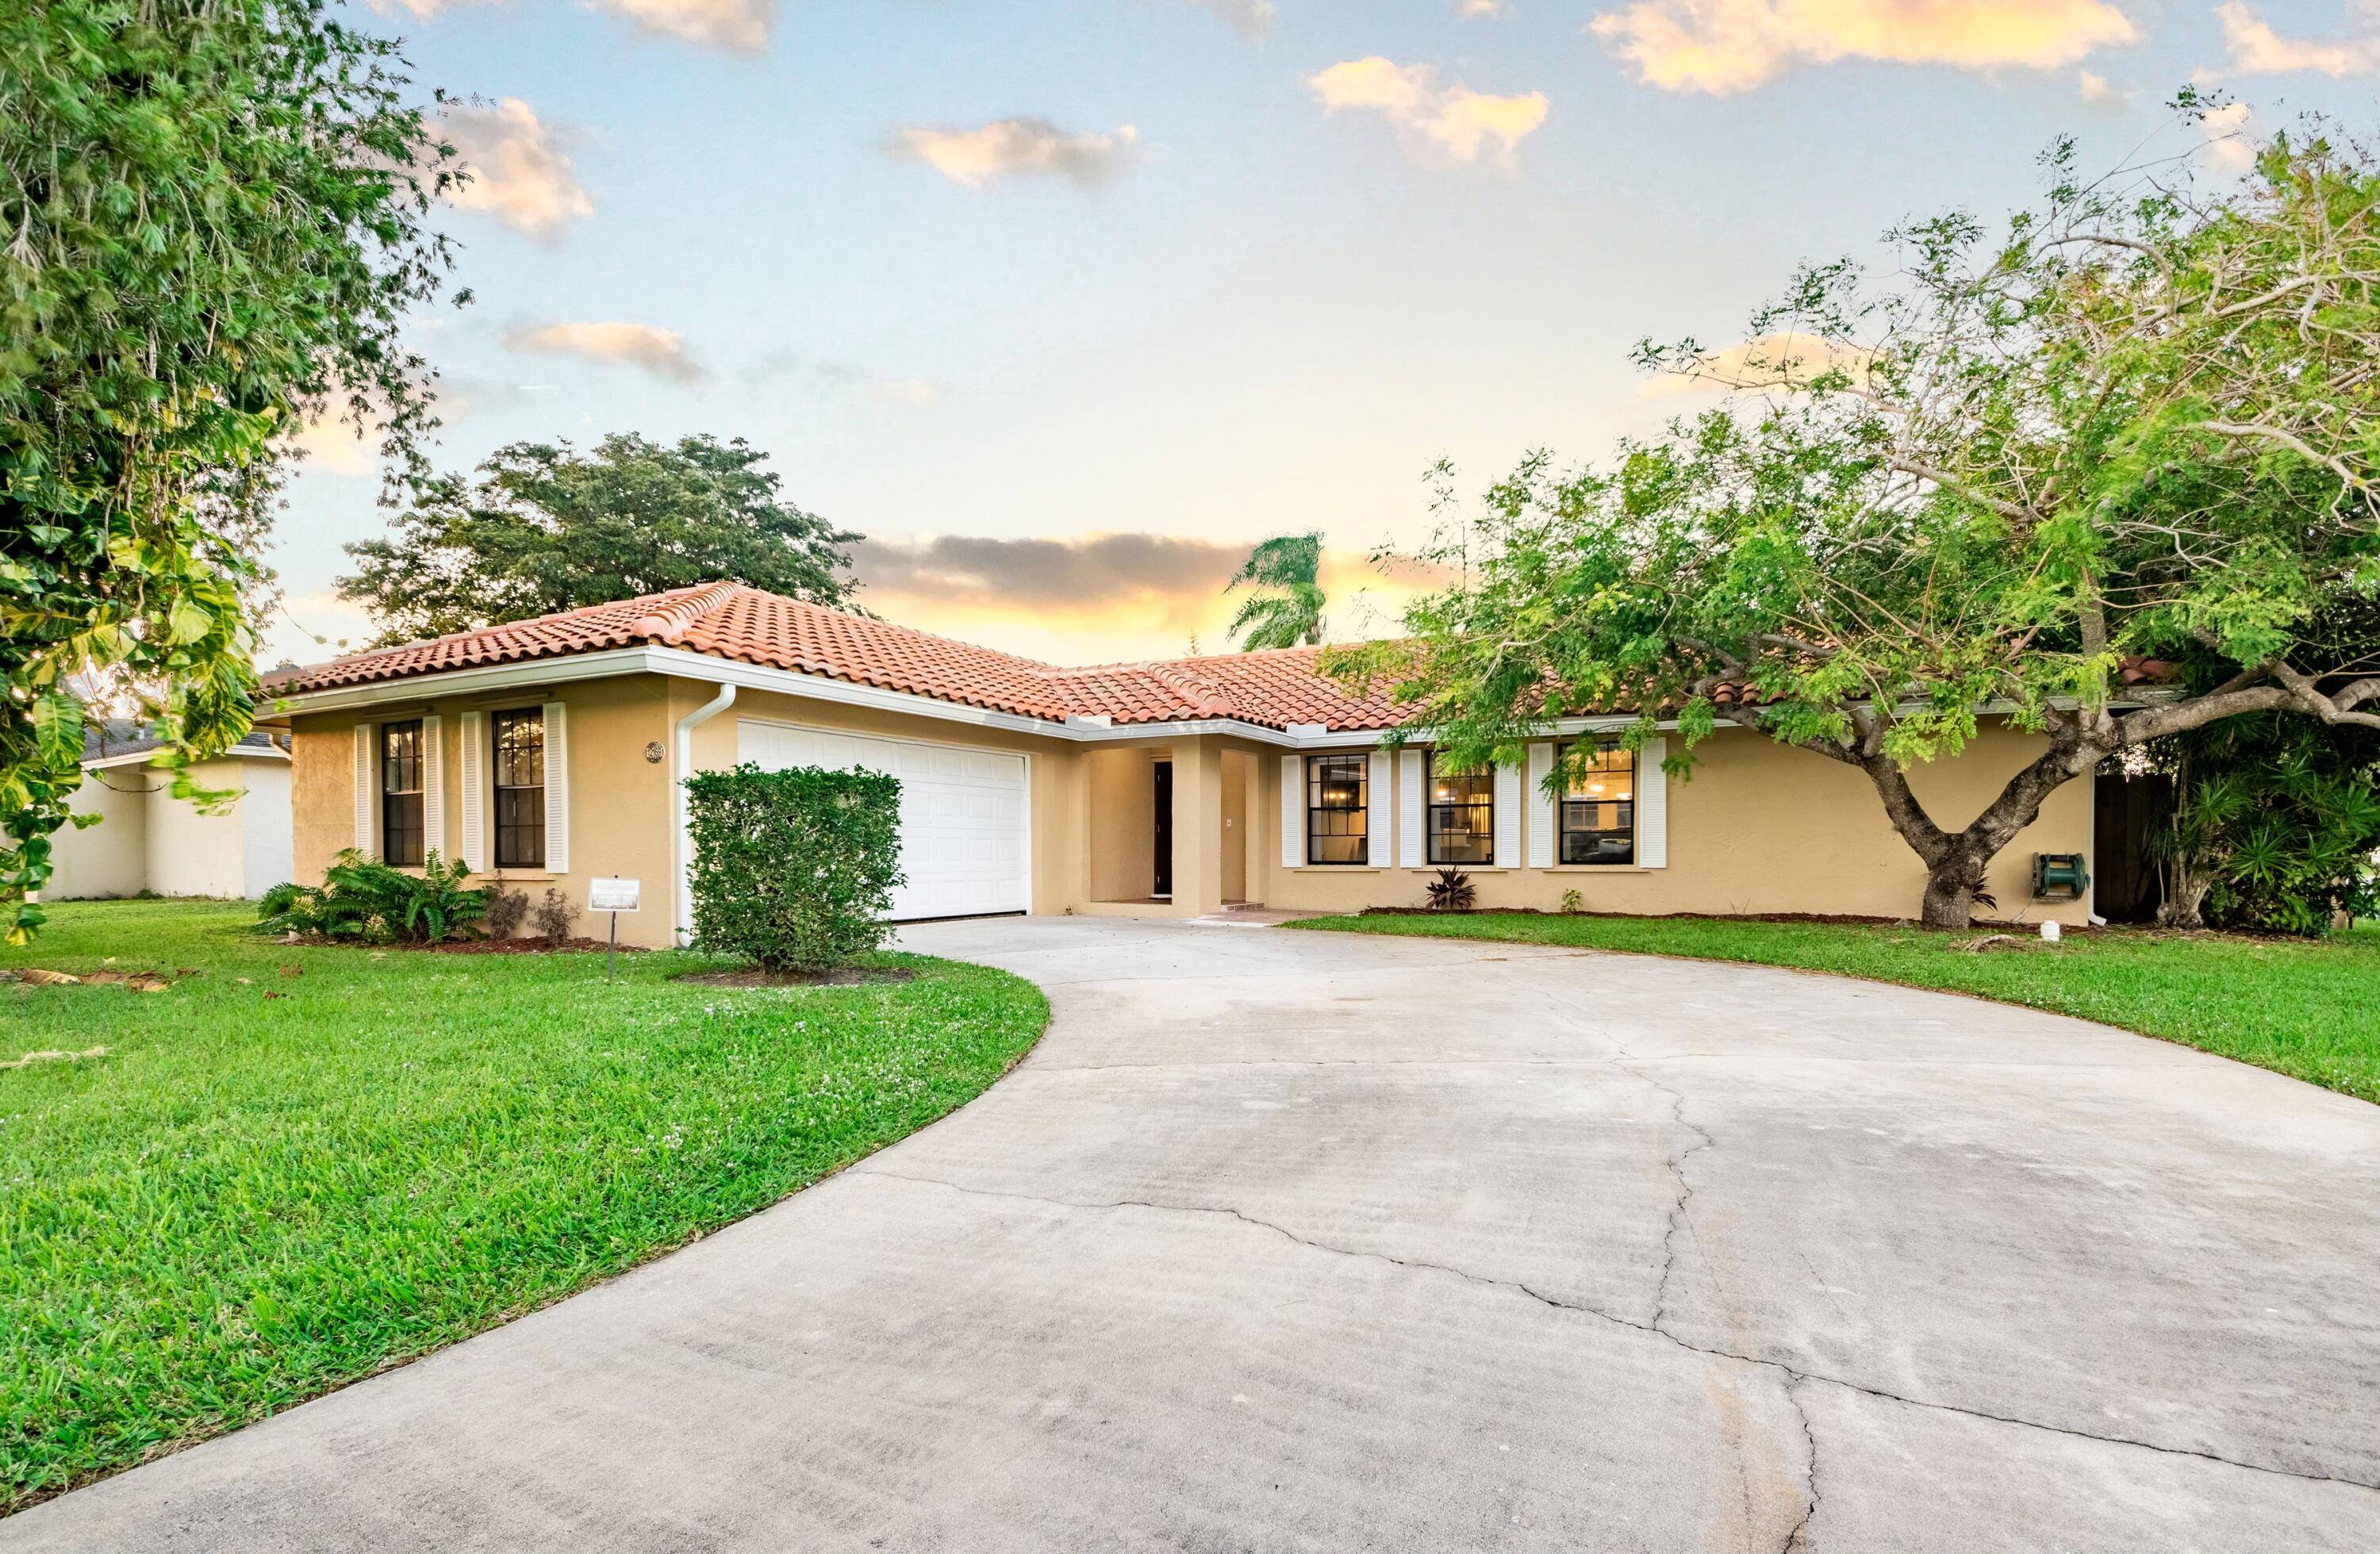 This stunning 4BR 2BA fully renovated home sits on a corner lot in a highly desirable community without HOA restrictions.